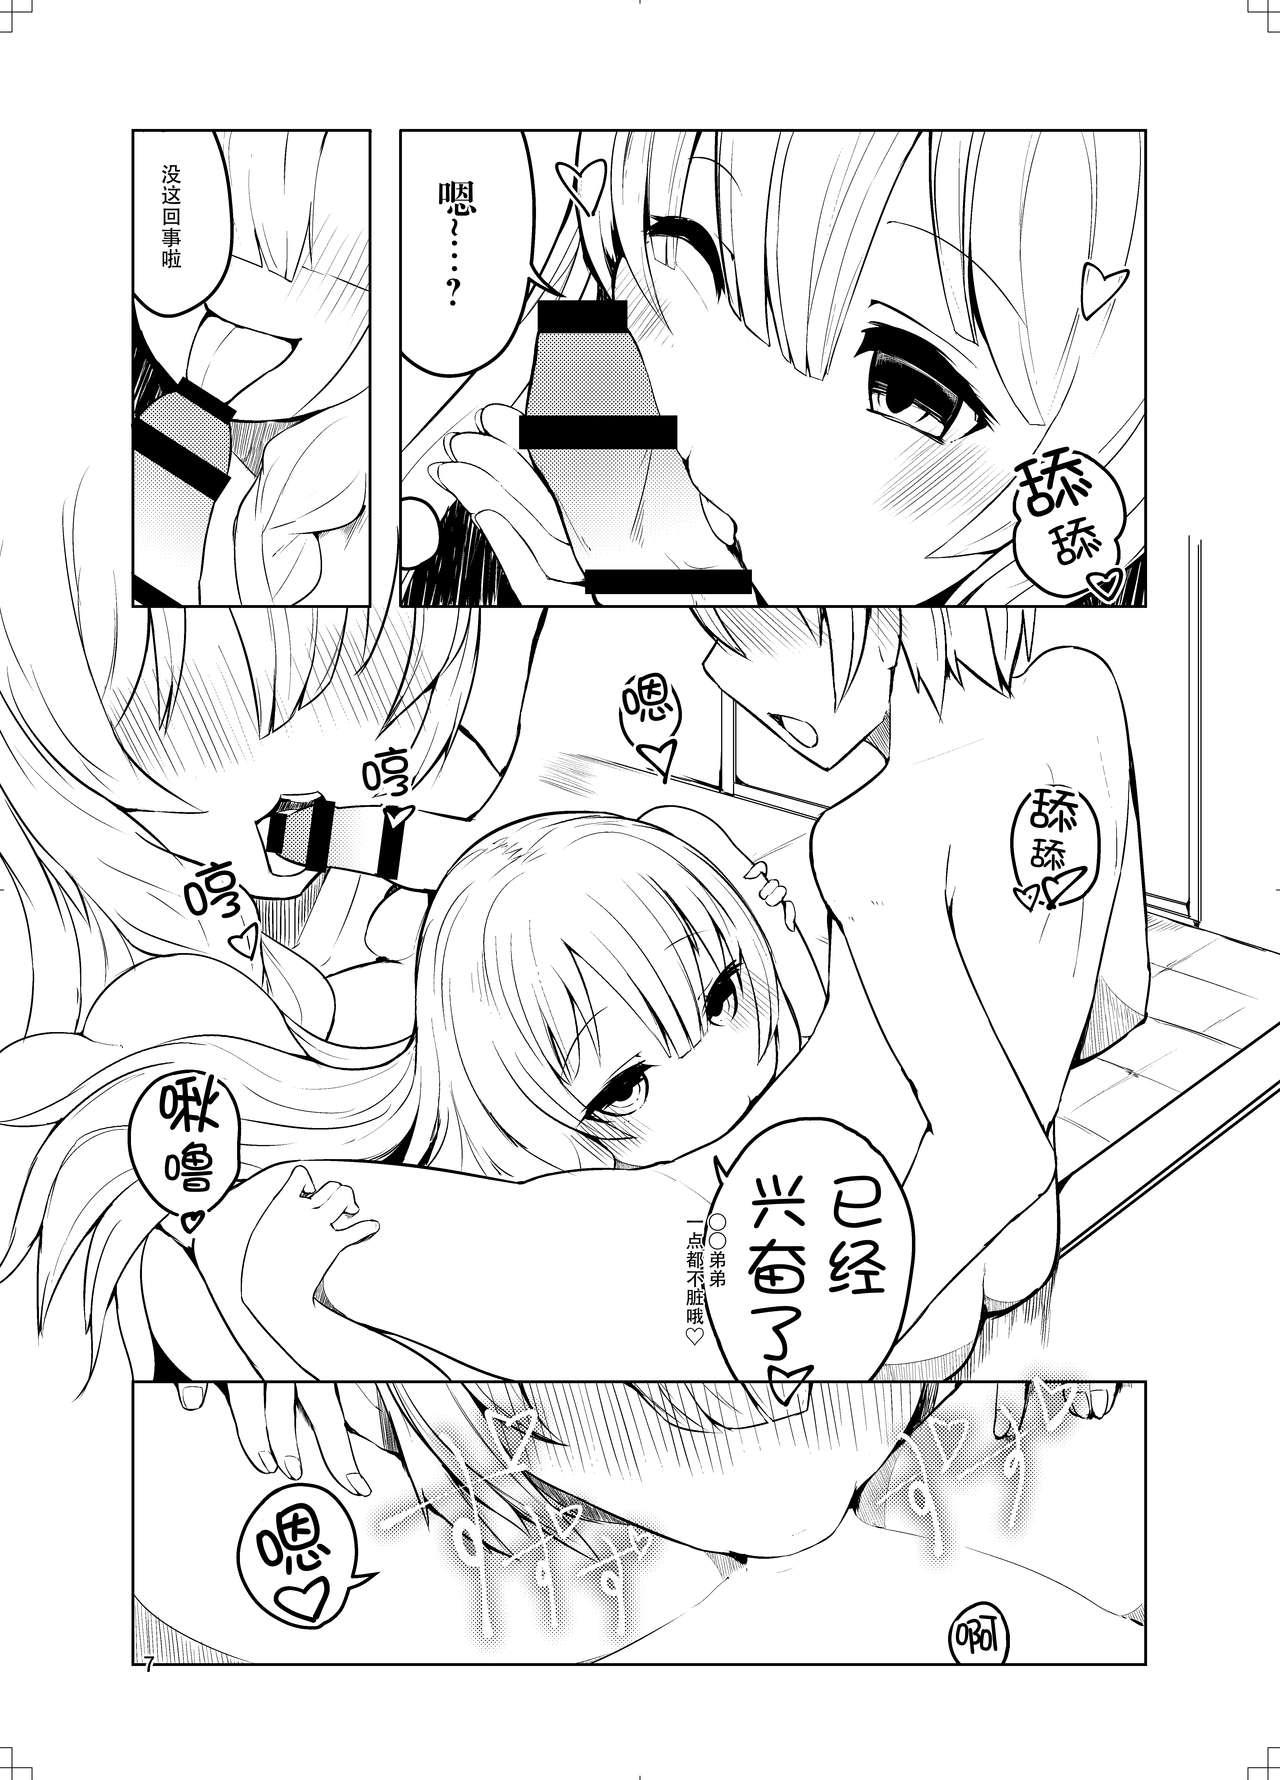 Couples Fucking Onee-san to Ofurox - Original Barely 18 Porn - Page 8